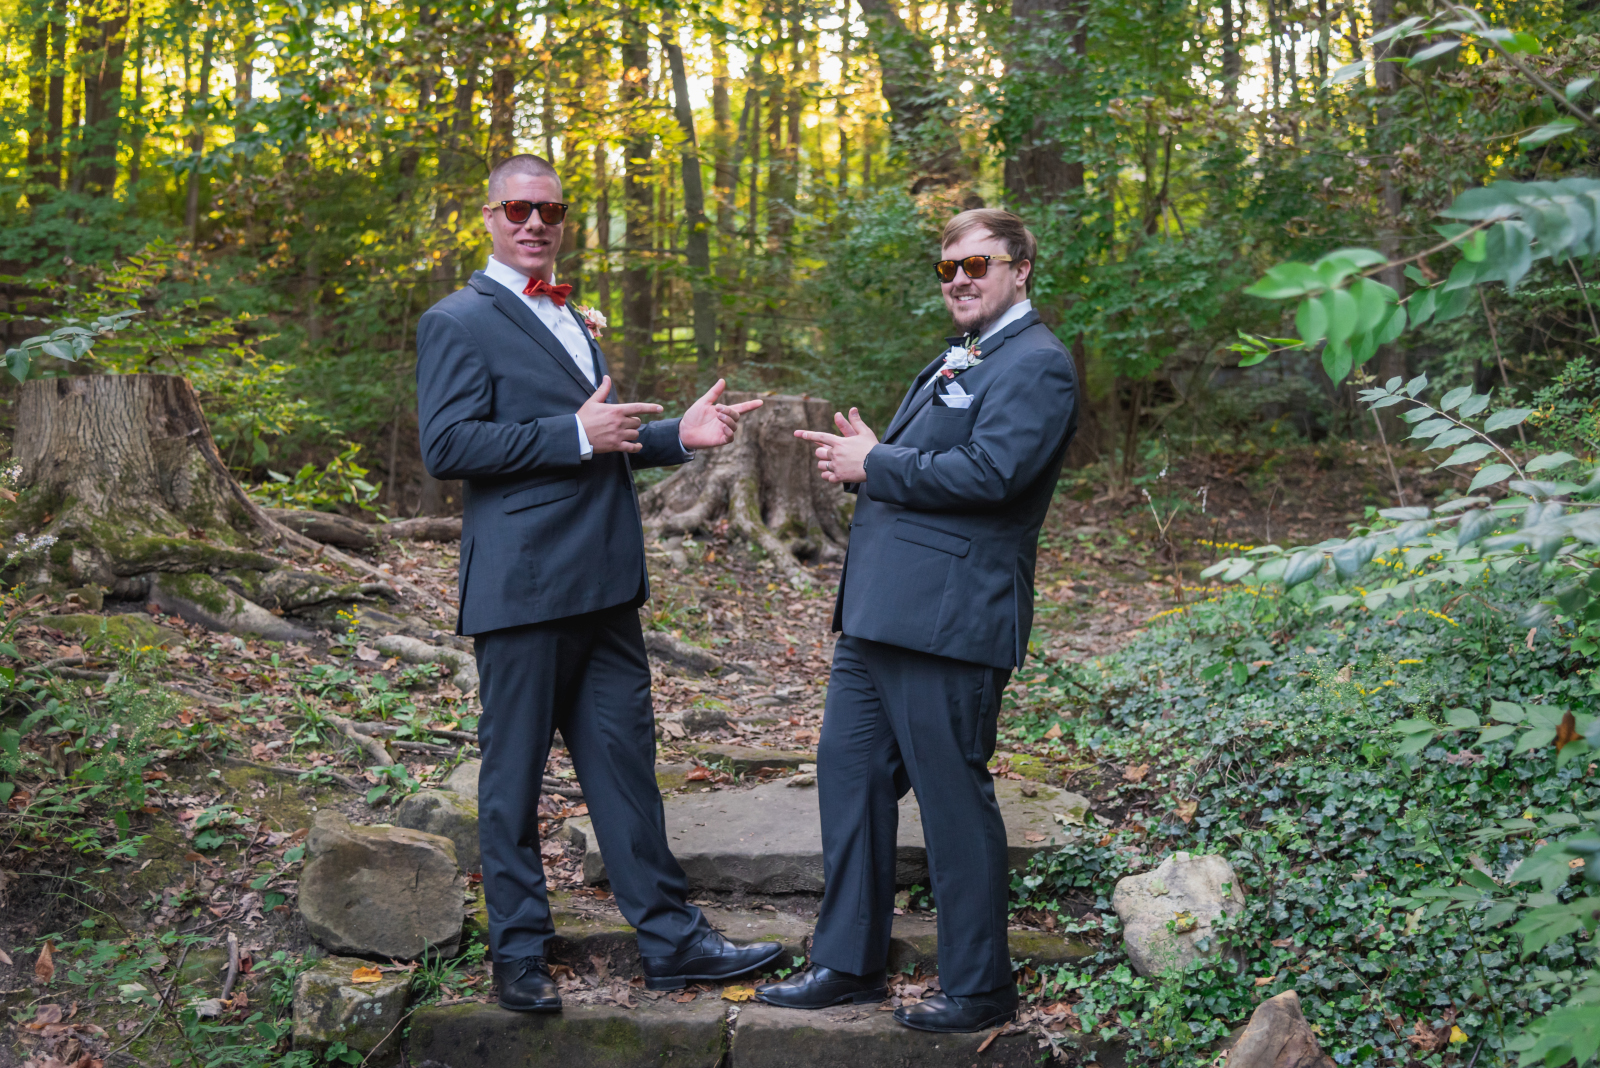 Groomsmen wearing sunglasses, bridal party portrait, unique bridal party portrait, fun bridal party portrait, finger guns, forest, nature, fall leaves, fall colors, trees, fall wedding, cute outdoor wedding ceremony at Grand Pacific Wedding Gardens